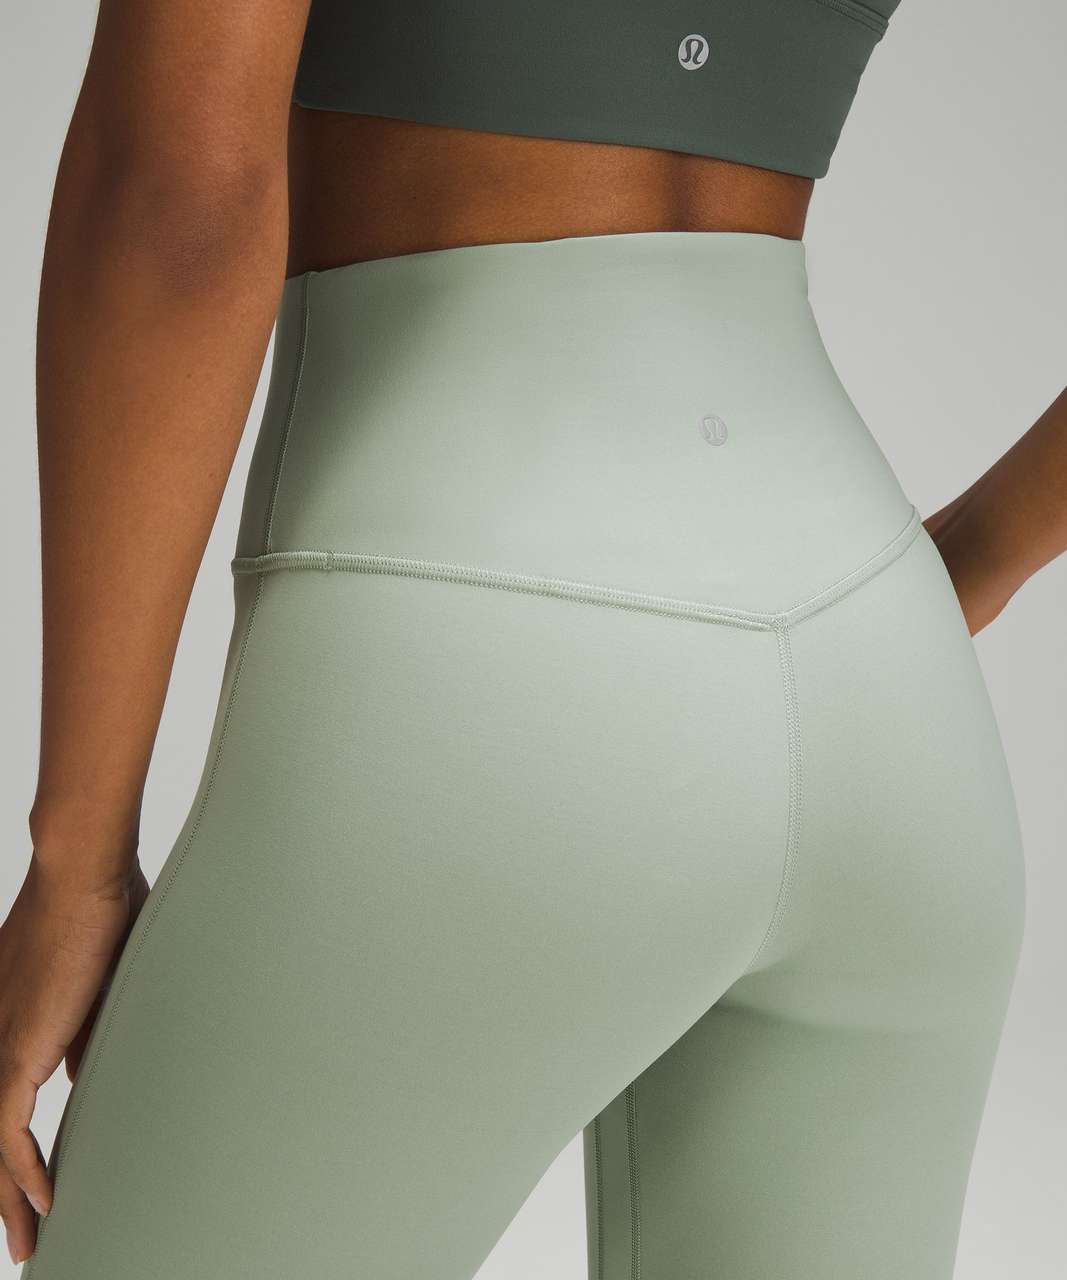 Lululemon Align High-Rise Mini-Flared Pant Regular Green Size 2 - $60 (49%  Off Retail) New With Tags - From kaleigh